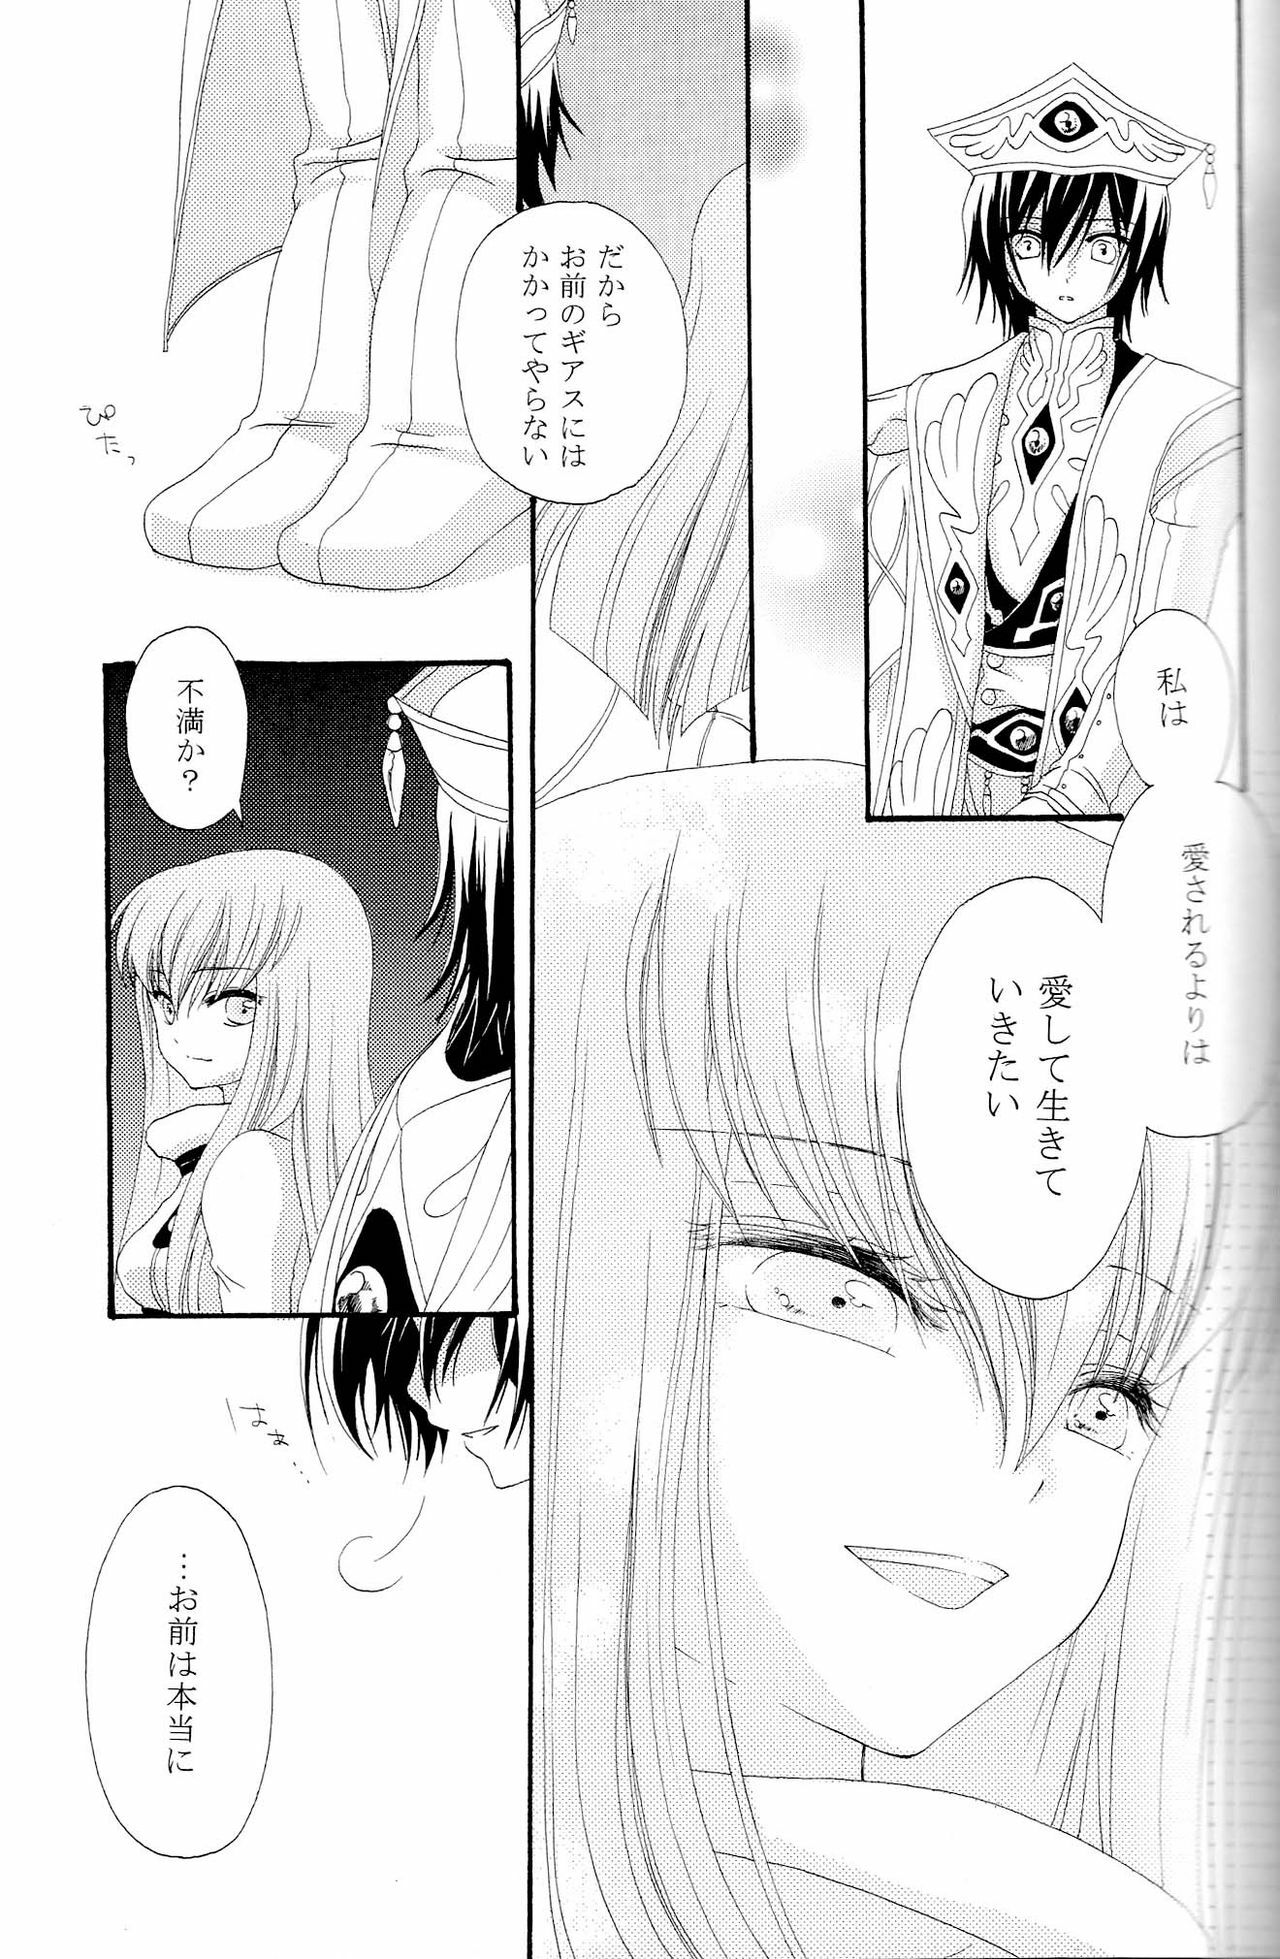 [APRICOT TEA] The last love letter presented to my dear only partner. (Code Geass) page 42 full